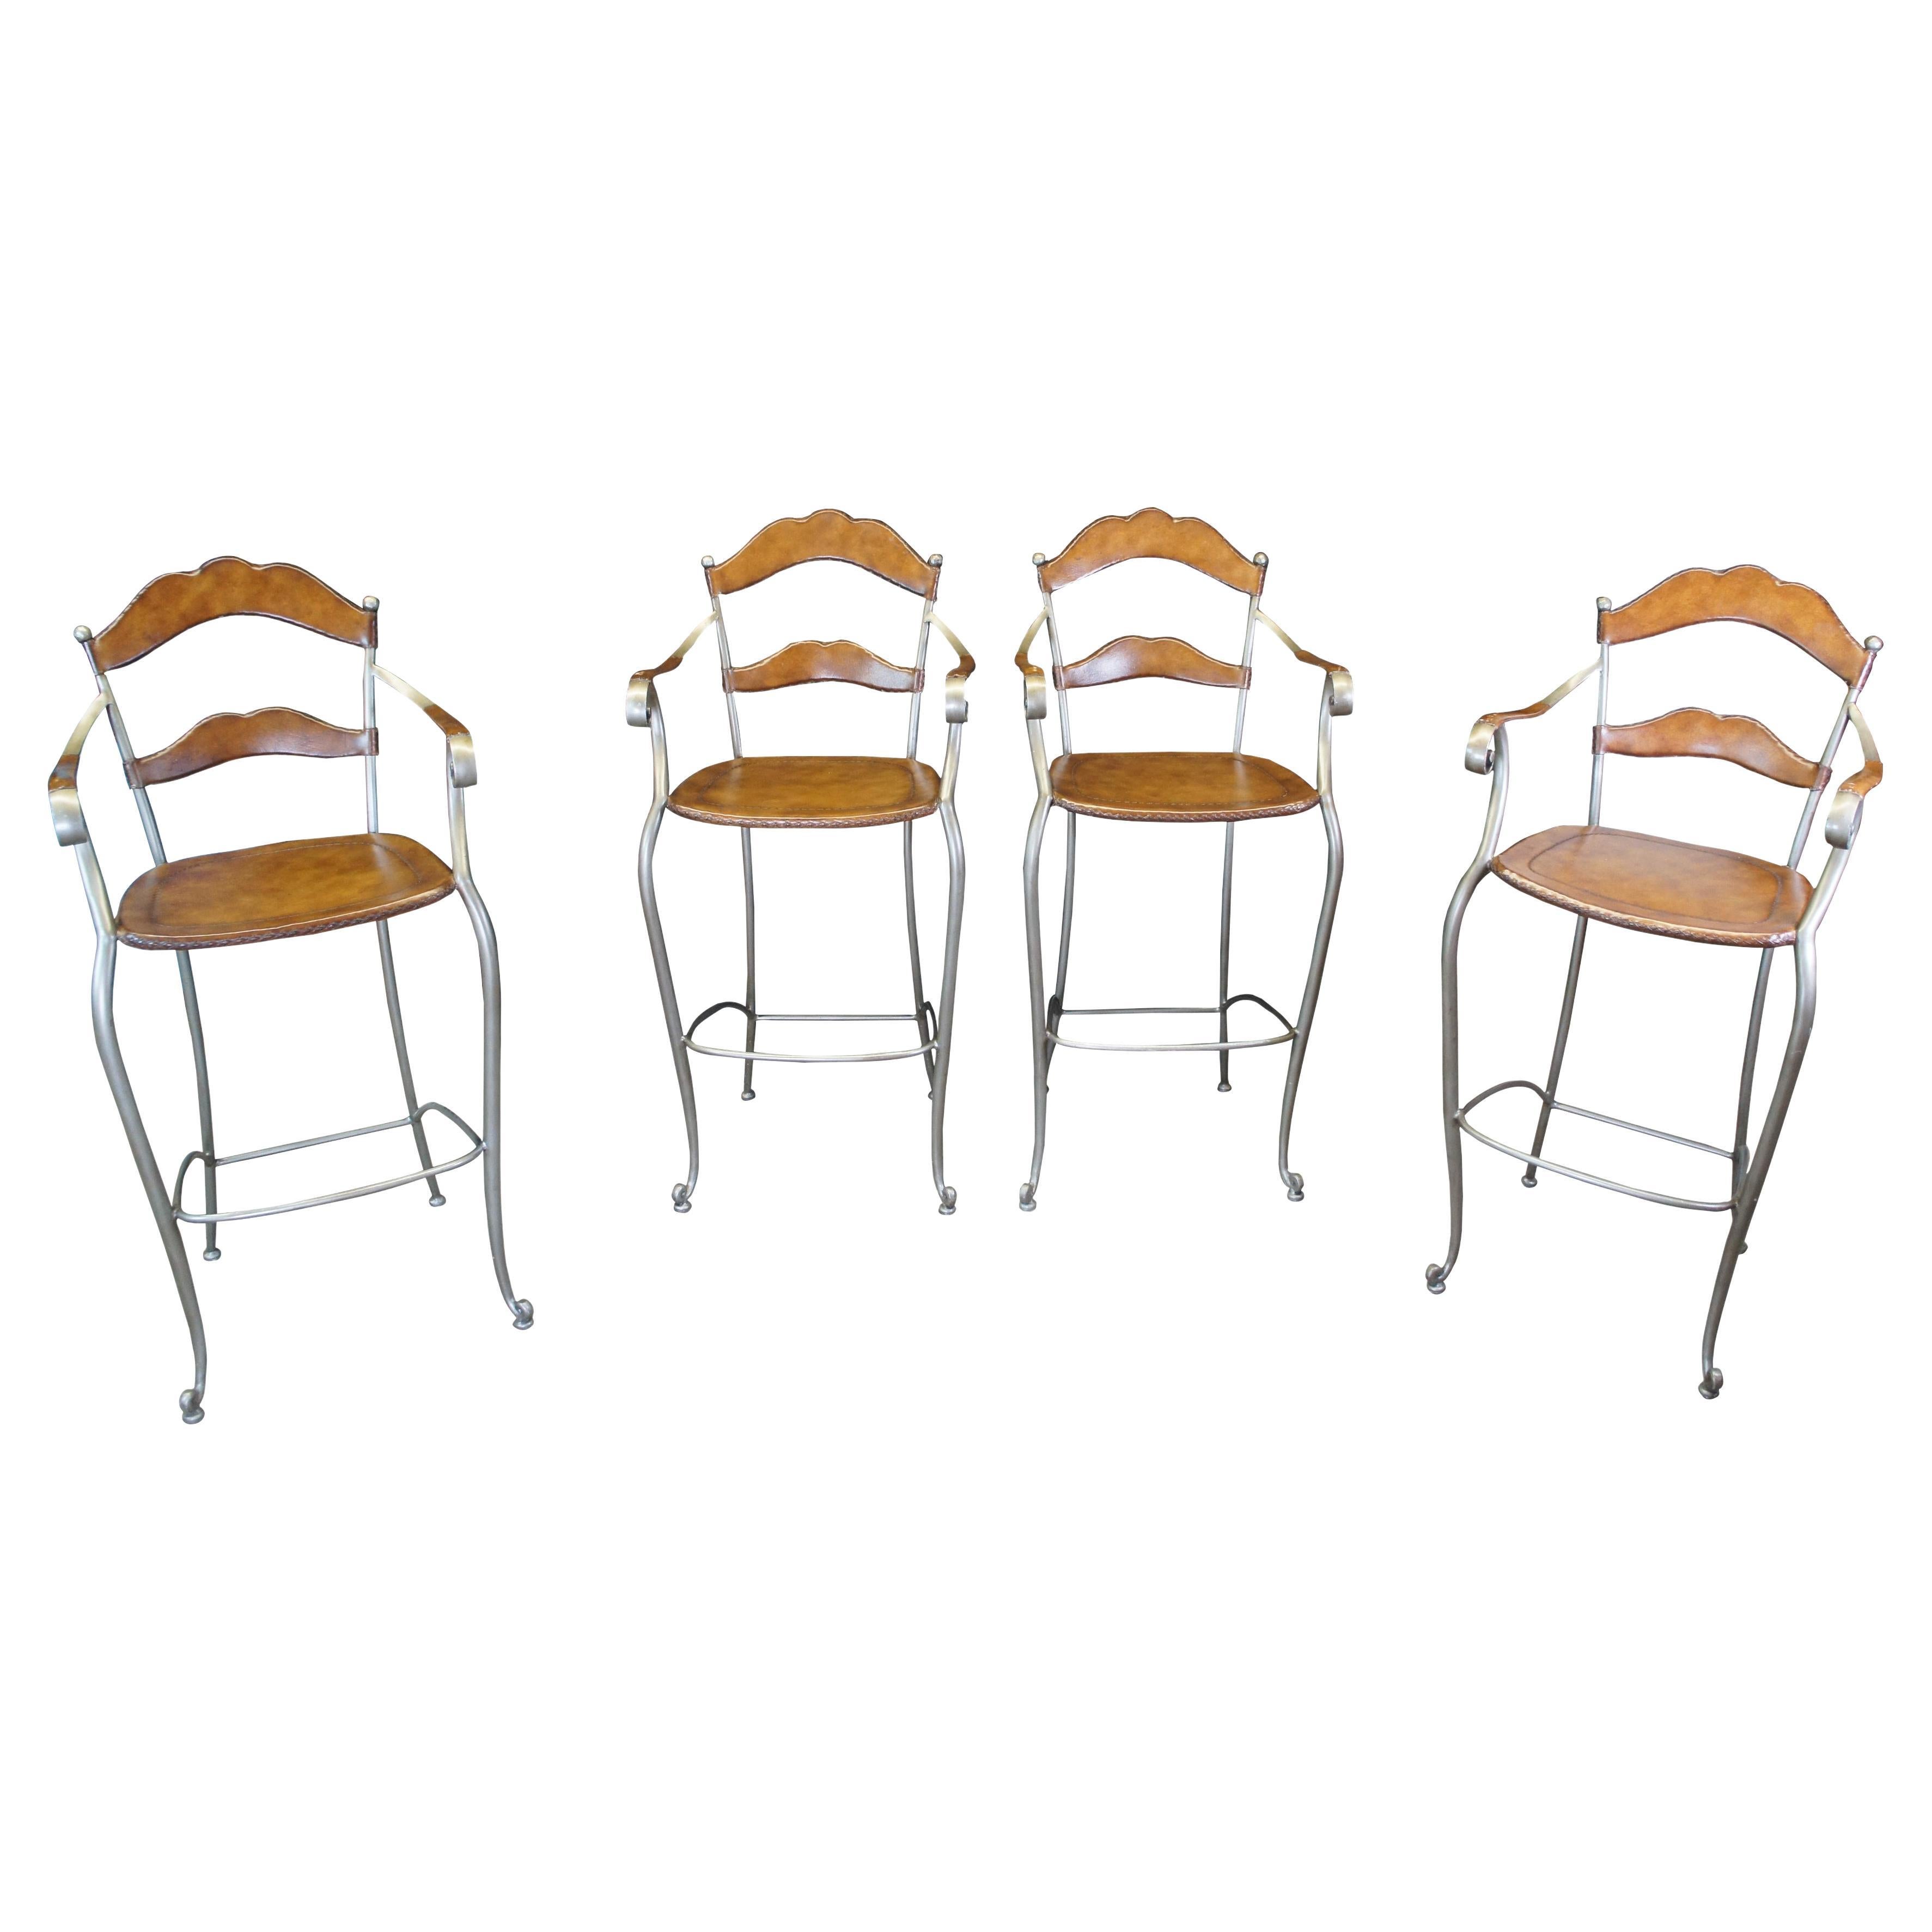 4 Vintage Leather & Iron Rustic Modern Counter Height Ladderback Bar Stools For Sale